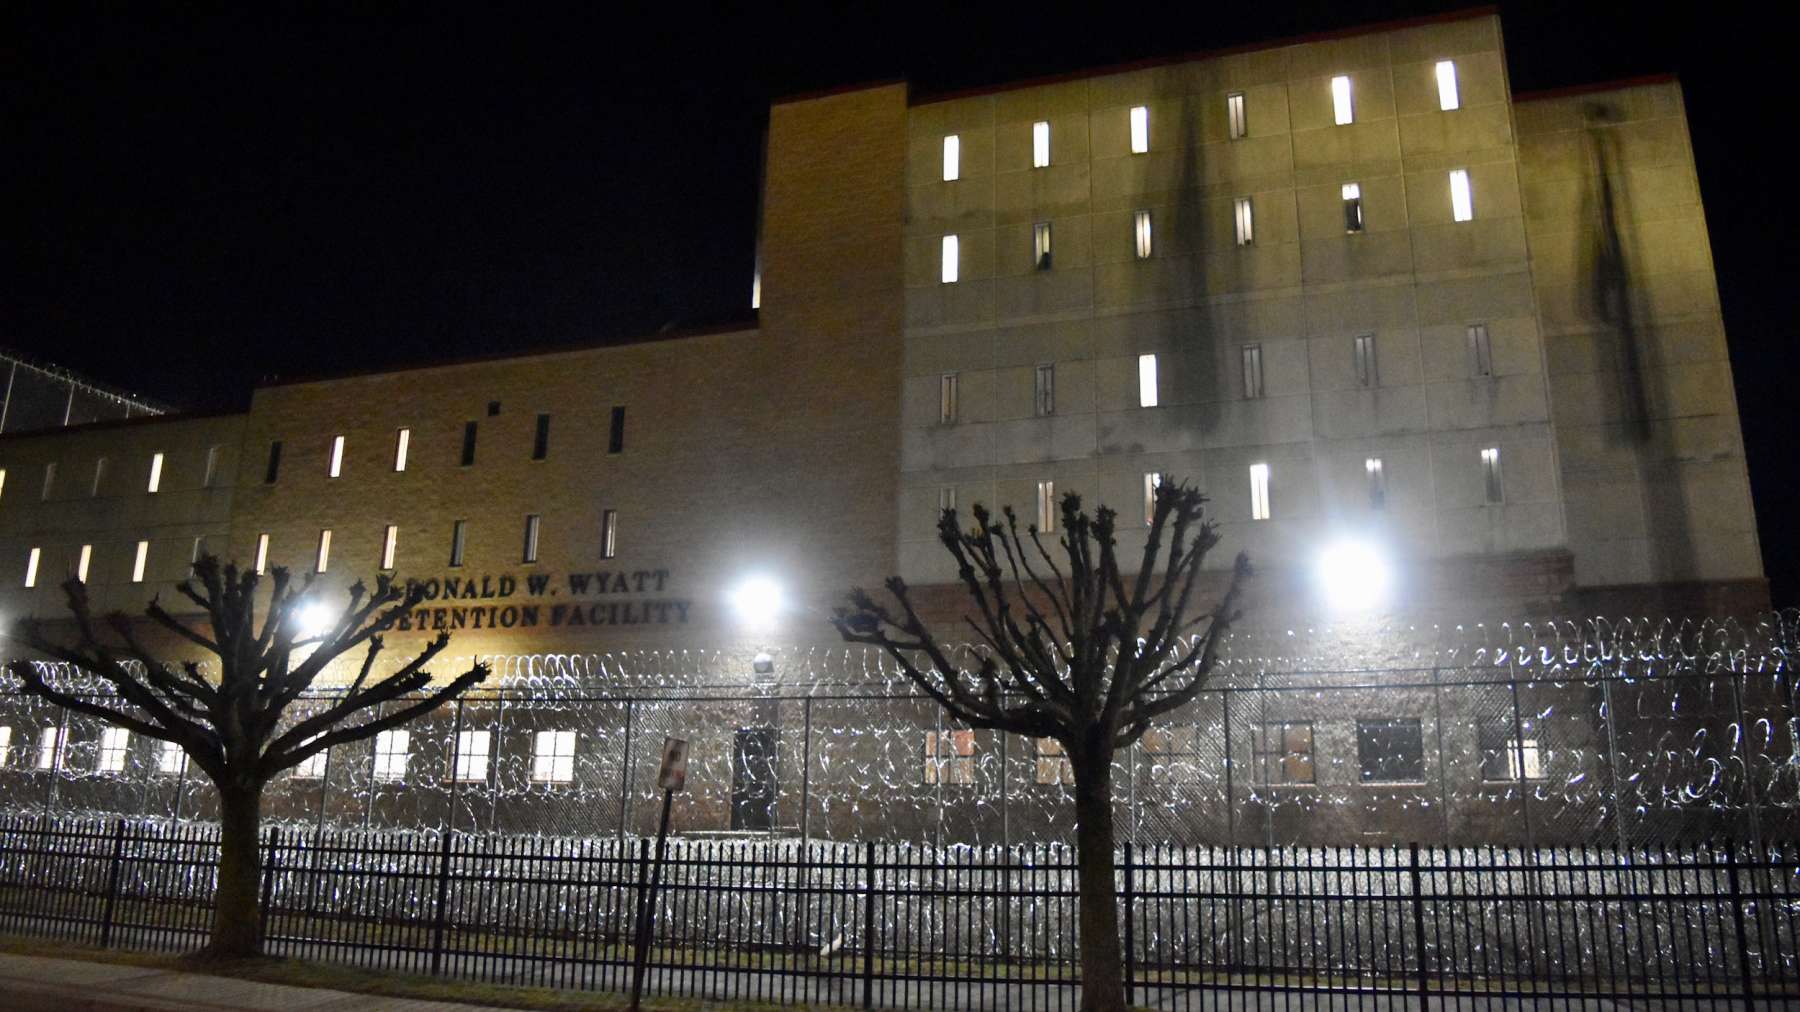 Correctional officer tests positive for COVID-19 at Wyatt